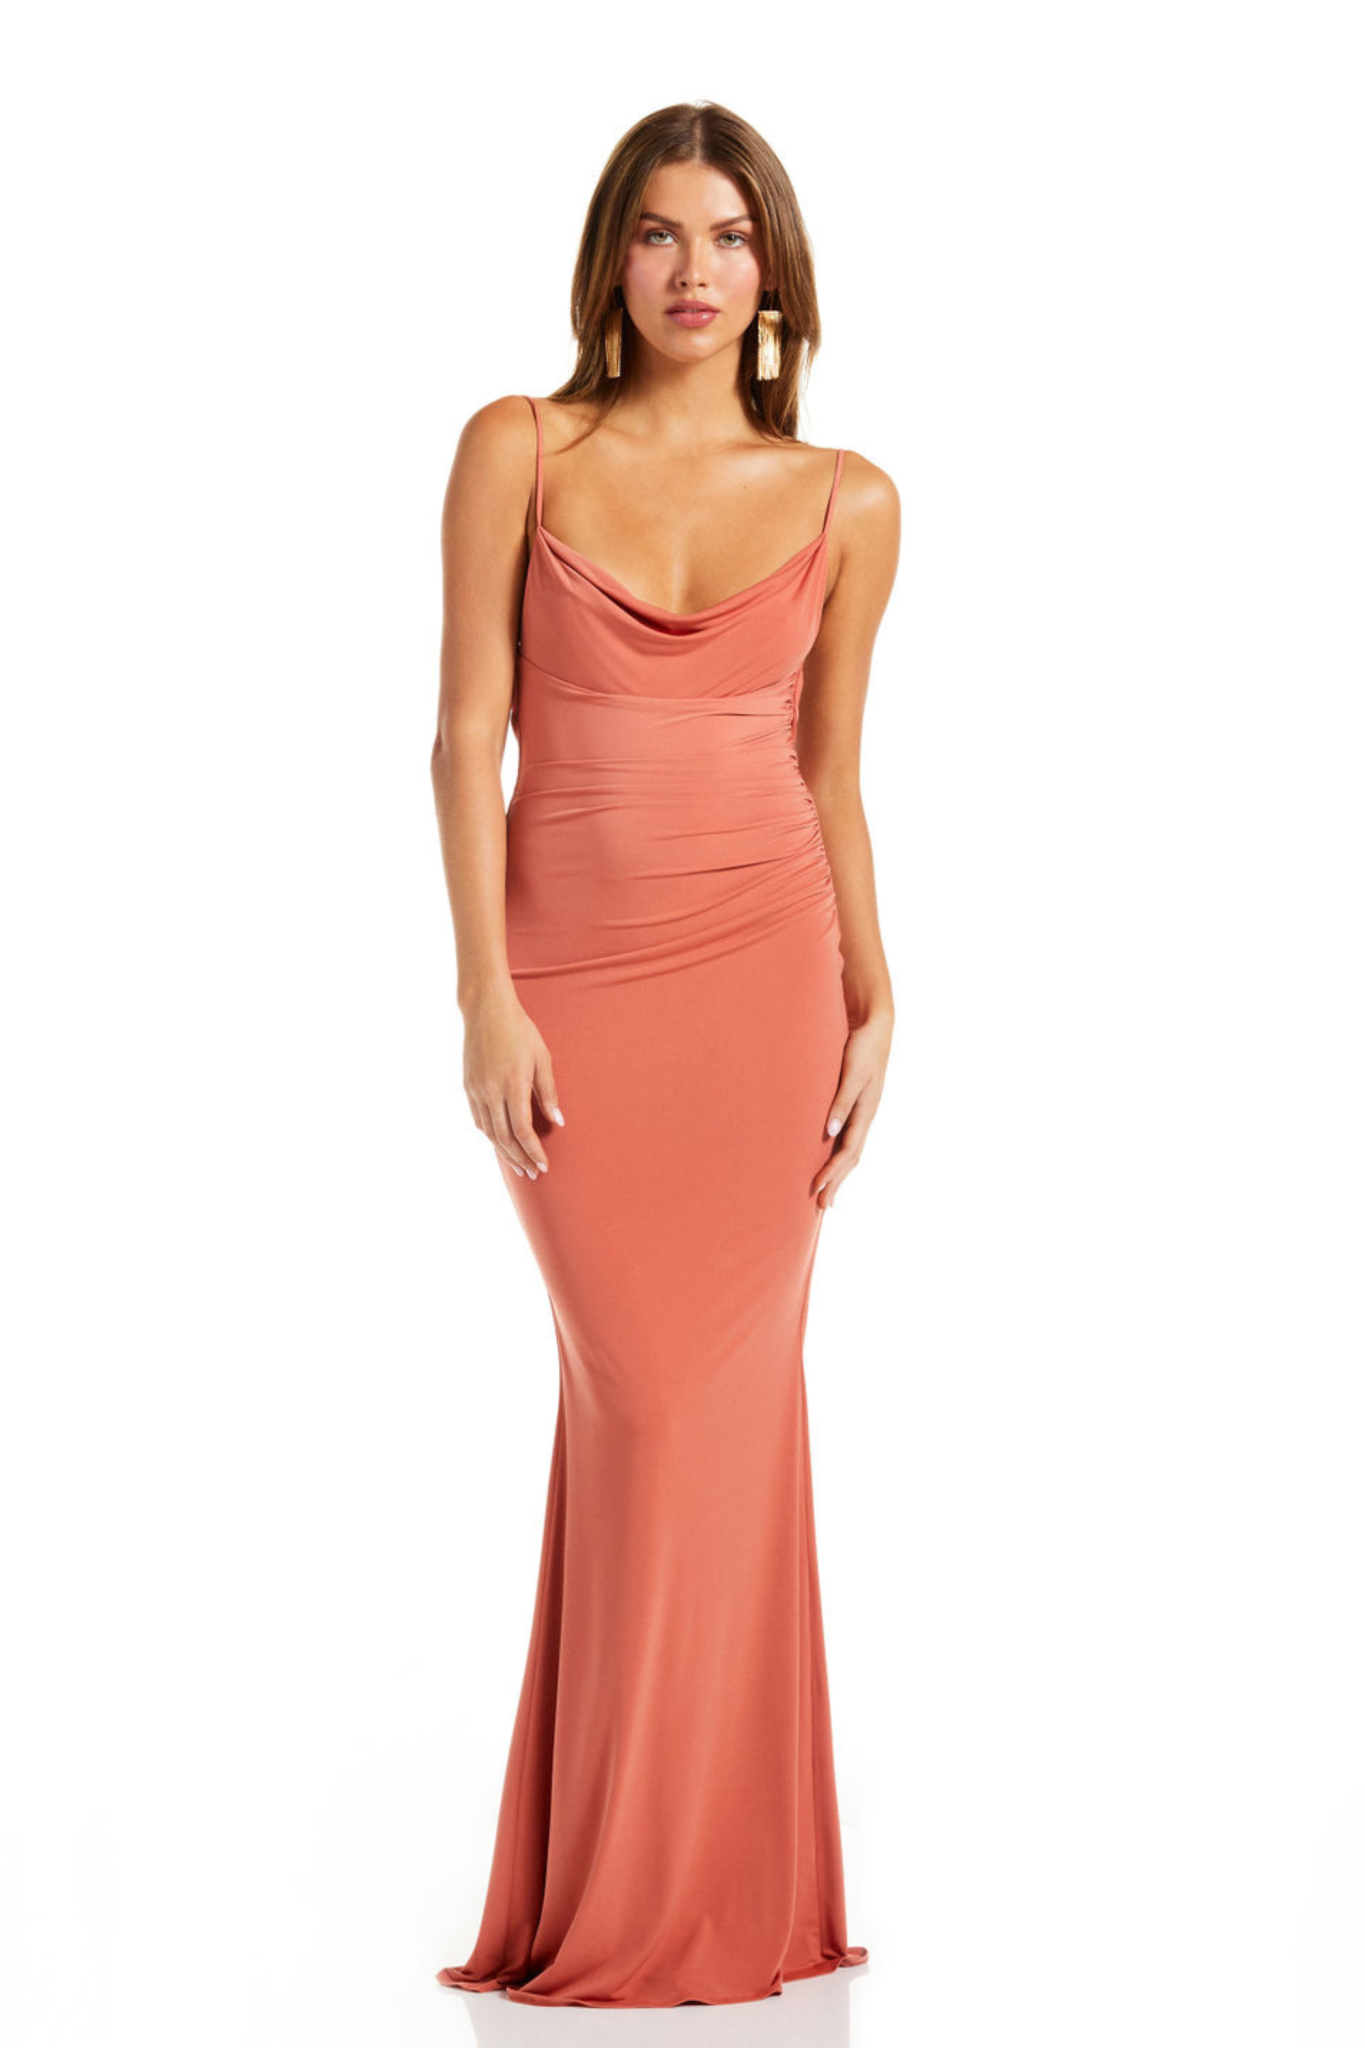 KATIE MAY KATIE MAY SURREAL SOFT COWL NECKLINE GOWN LONG DRESSES